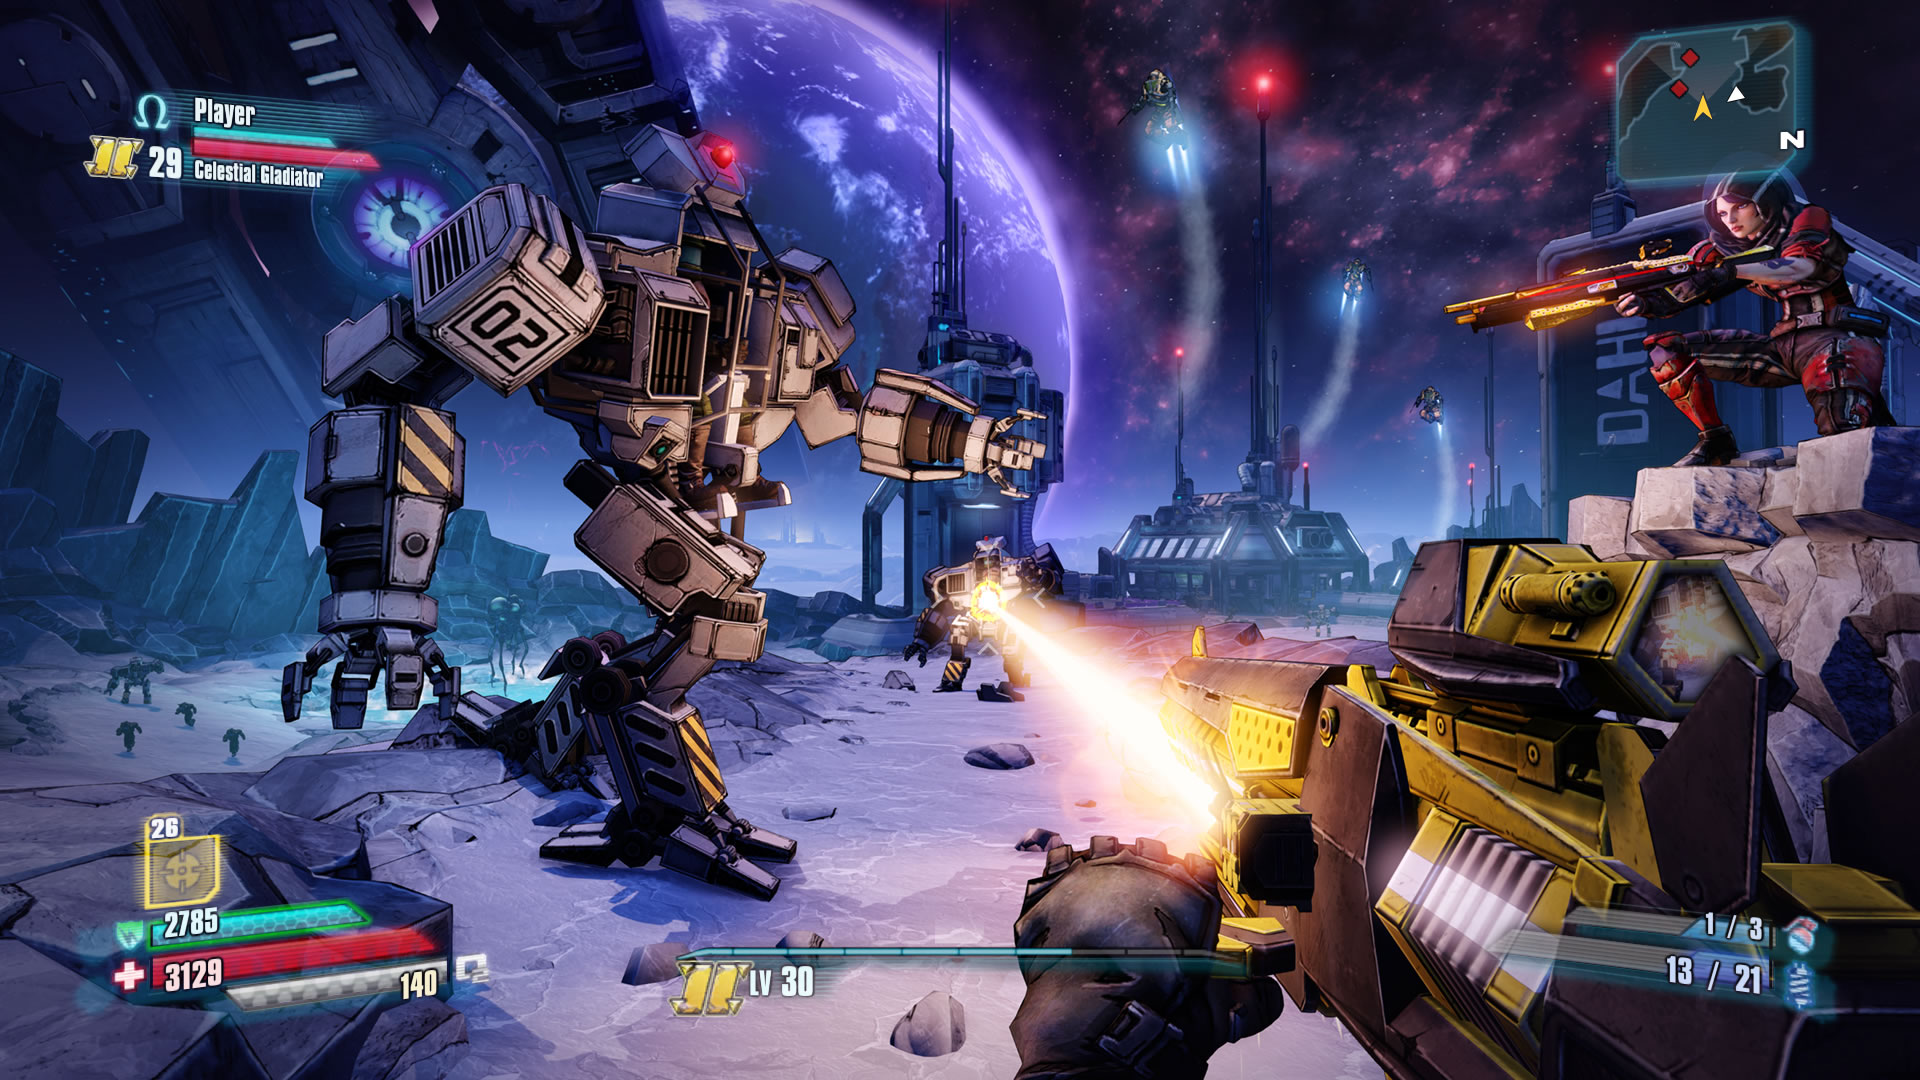 [PAX East 14] Borderlands: The Pre-Sequel Preview: Days of Future Past